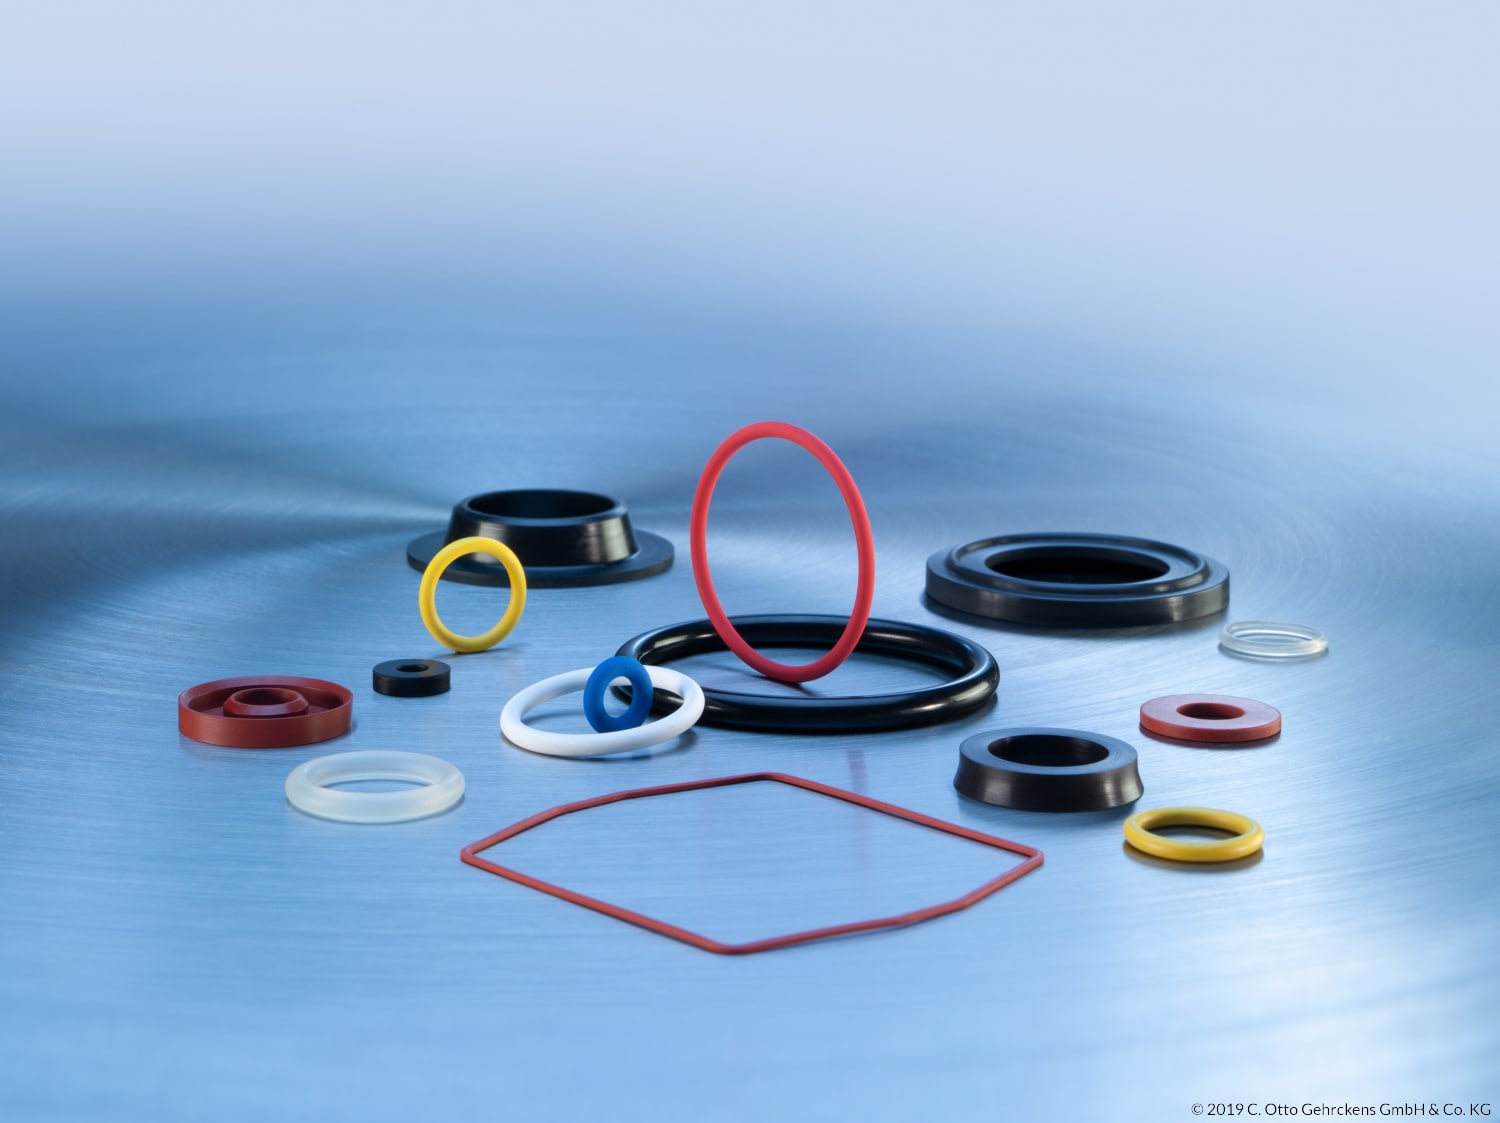 O-rings and elastomer seals from COG